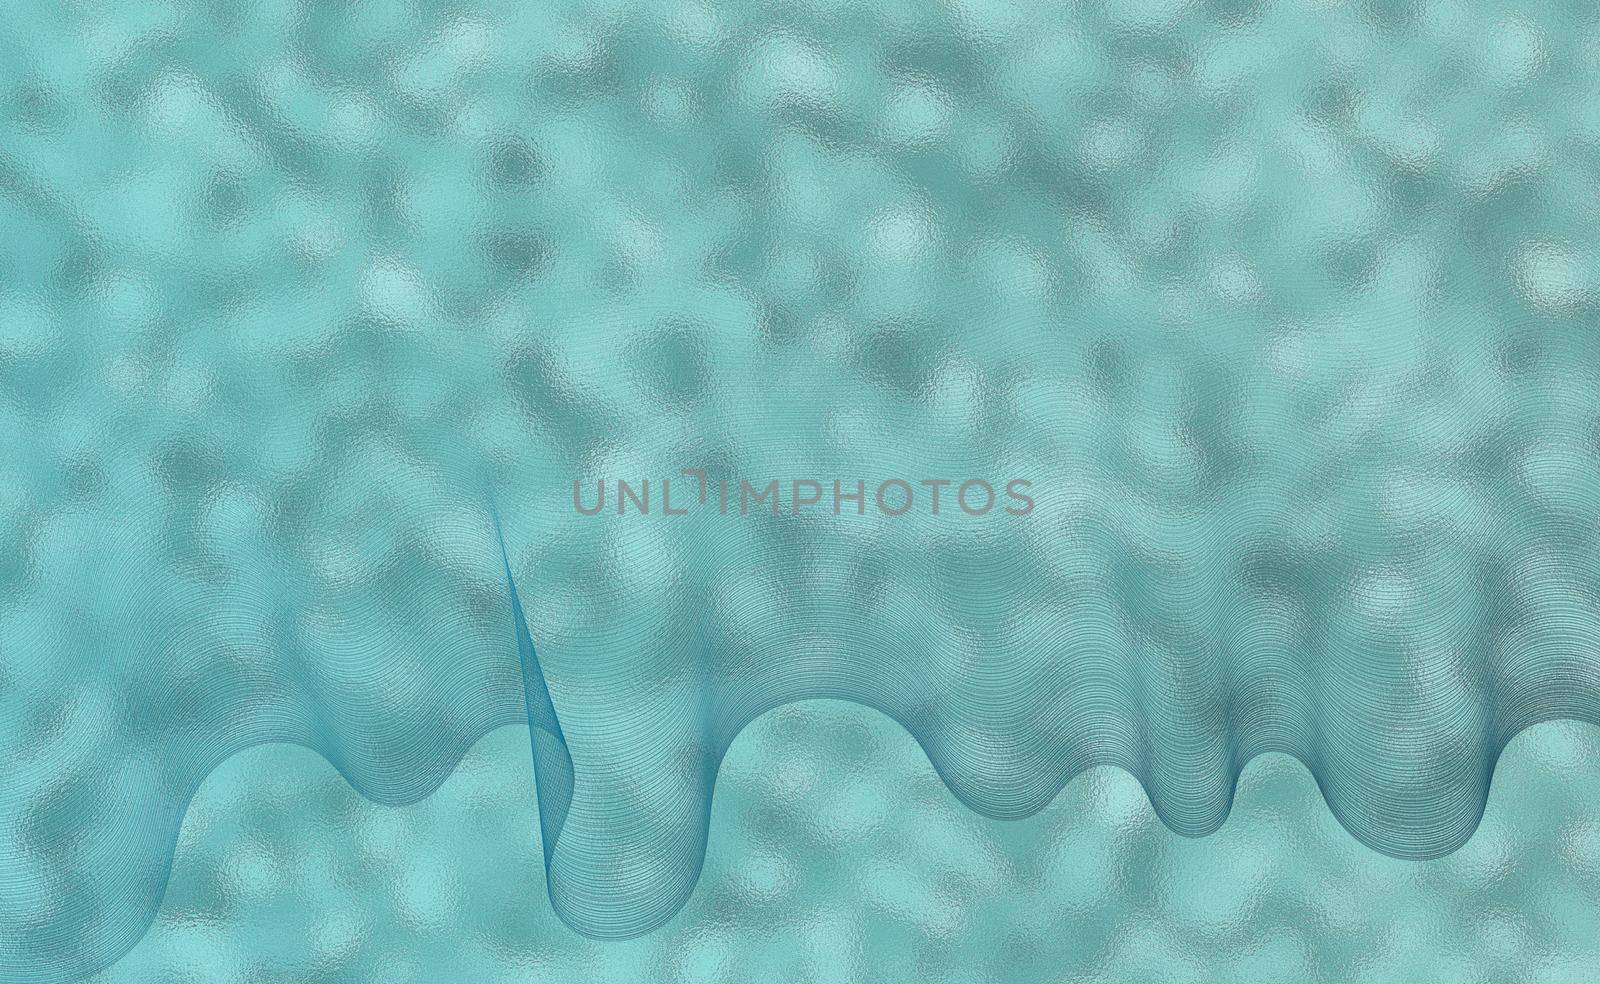 Abstract wave background in turquoise blue. Ocean sea water, ecology. Beautiful motion waving texture in blue green. Abstract lines design template for brochures, flyers. Illustration